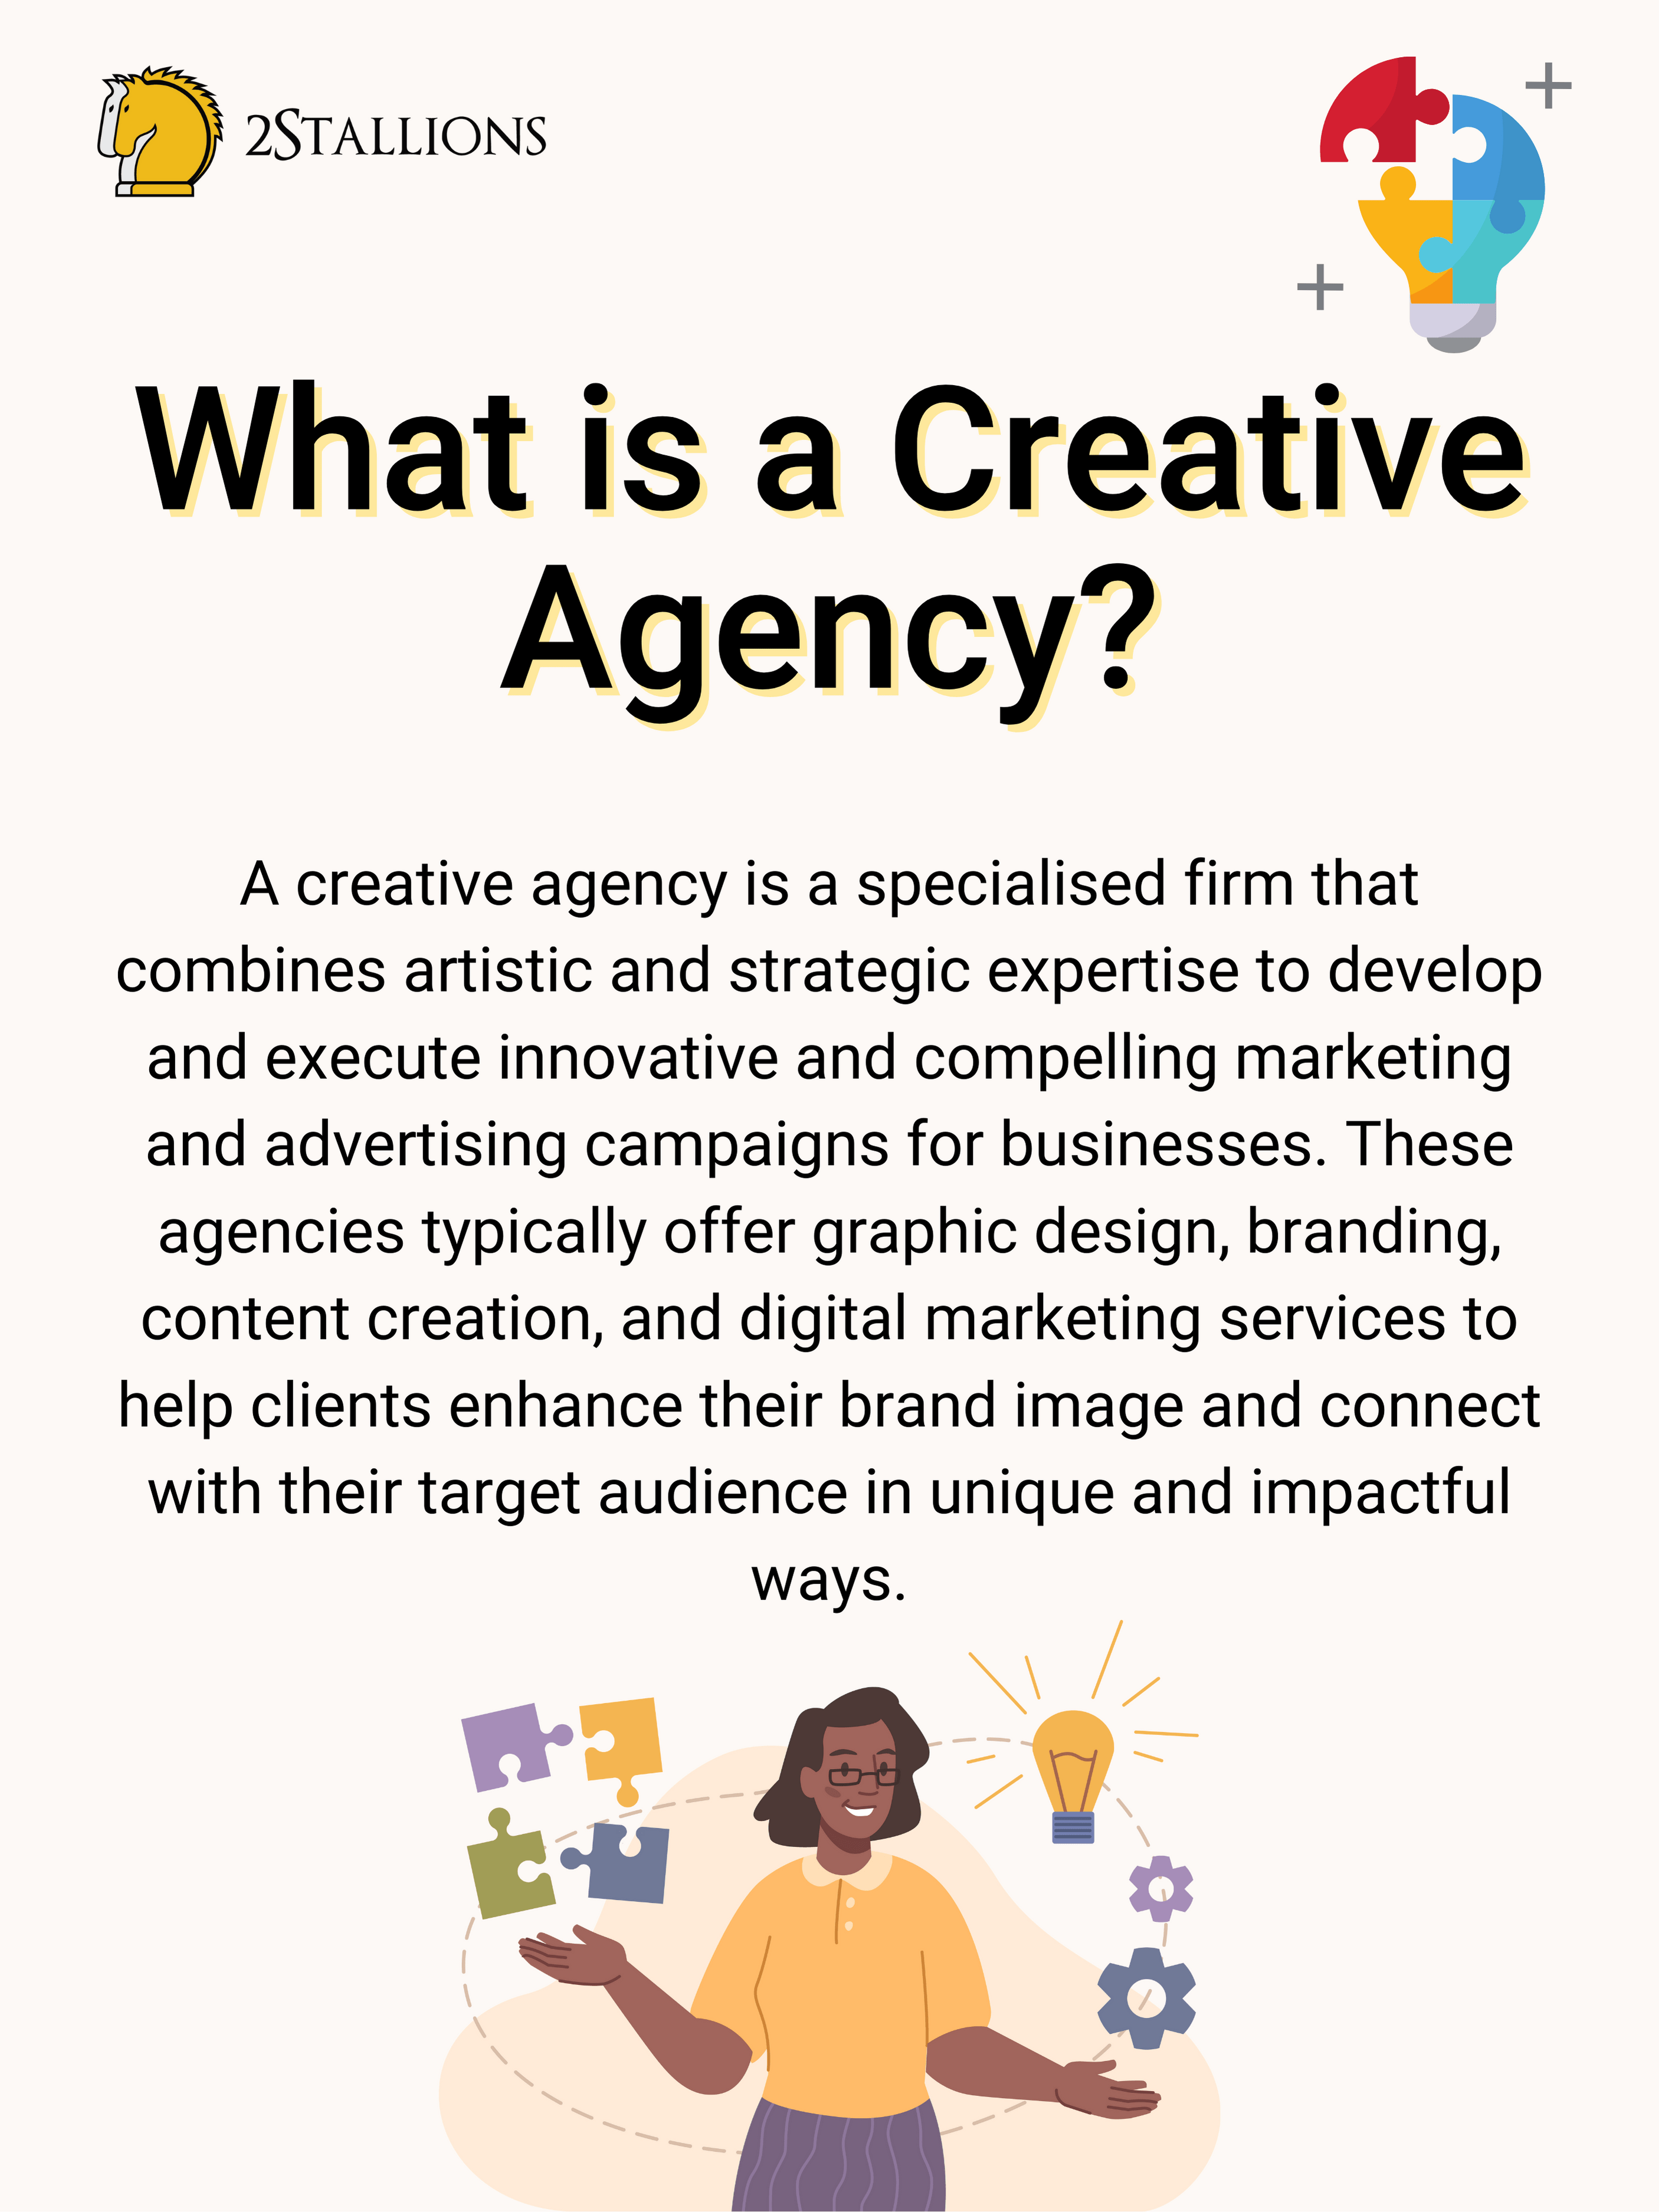 What Is a Creative Agency | 2Stallions